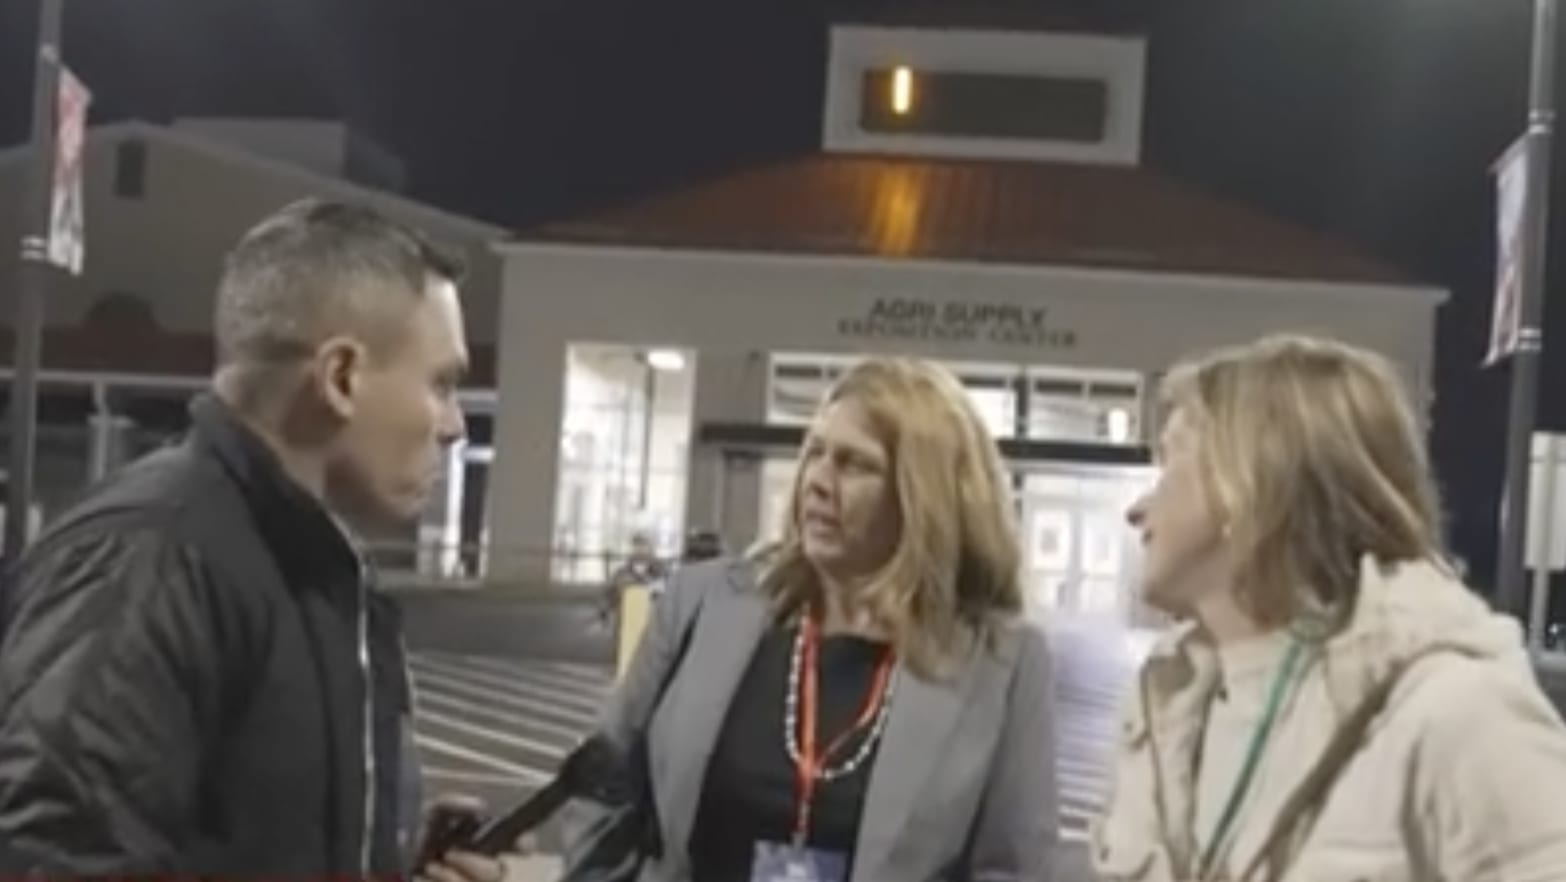 CNN reporter Shimon Prokupecz confronts Michele Morrow, the GOP nominee to run N.C. public schools, on her call for Biden’s execution.